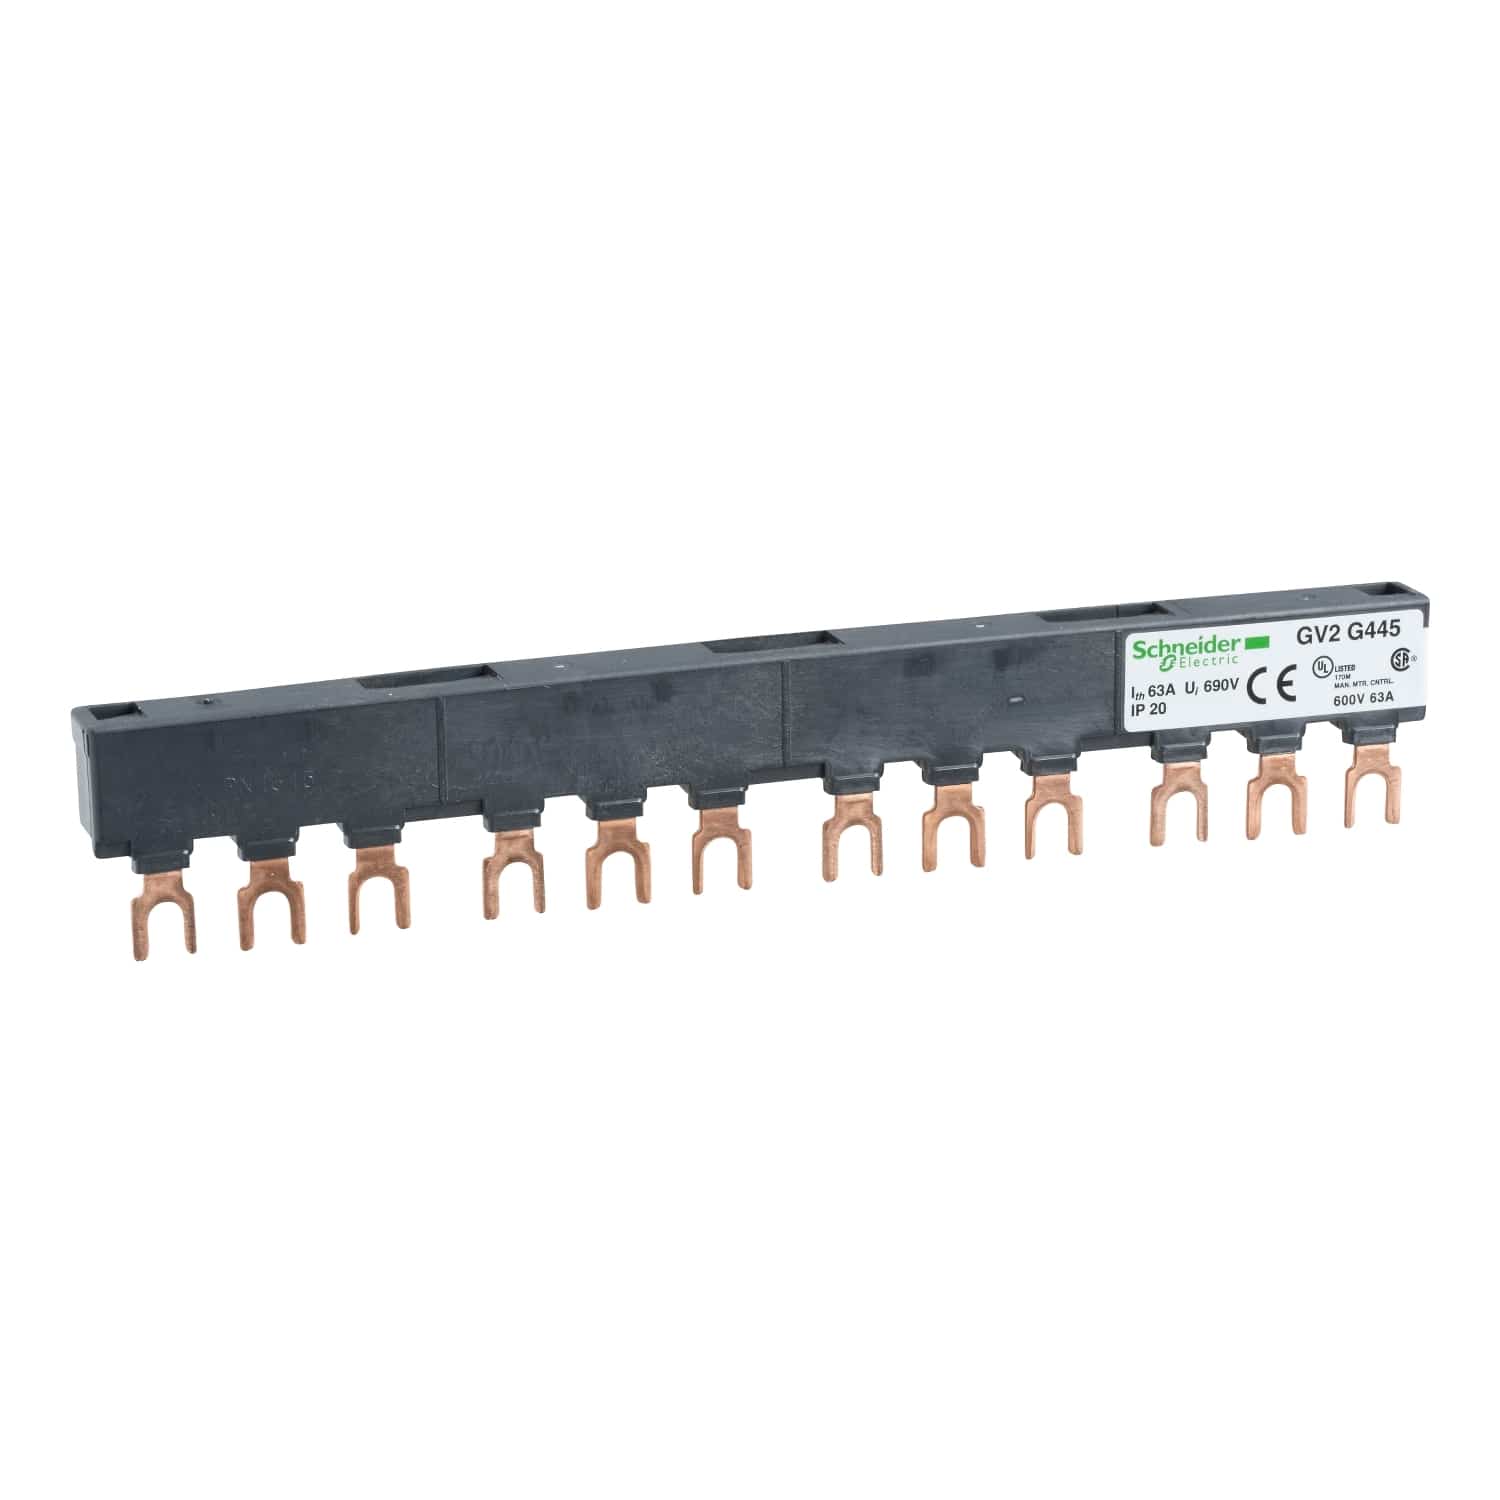 Linergy FT, Comb busbar, 63 A, 4 tap-offs, 45 mm pitch